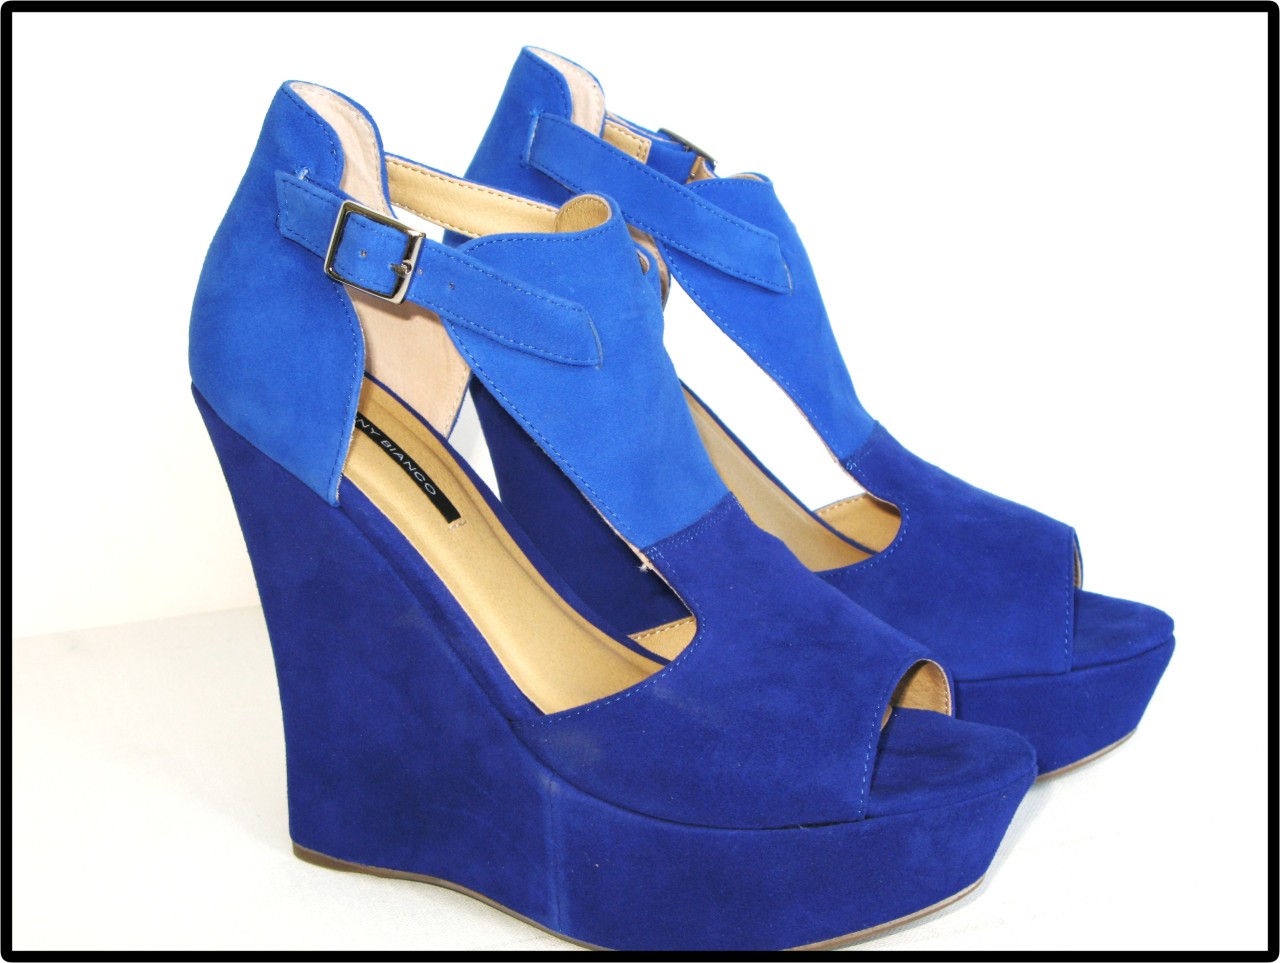 :: GOINGKOOKIES in MELBOURNE ::: BLUE wedding shoes